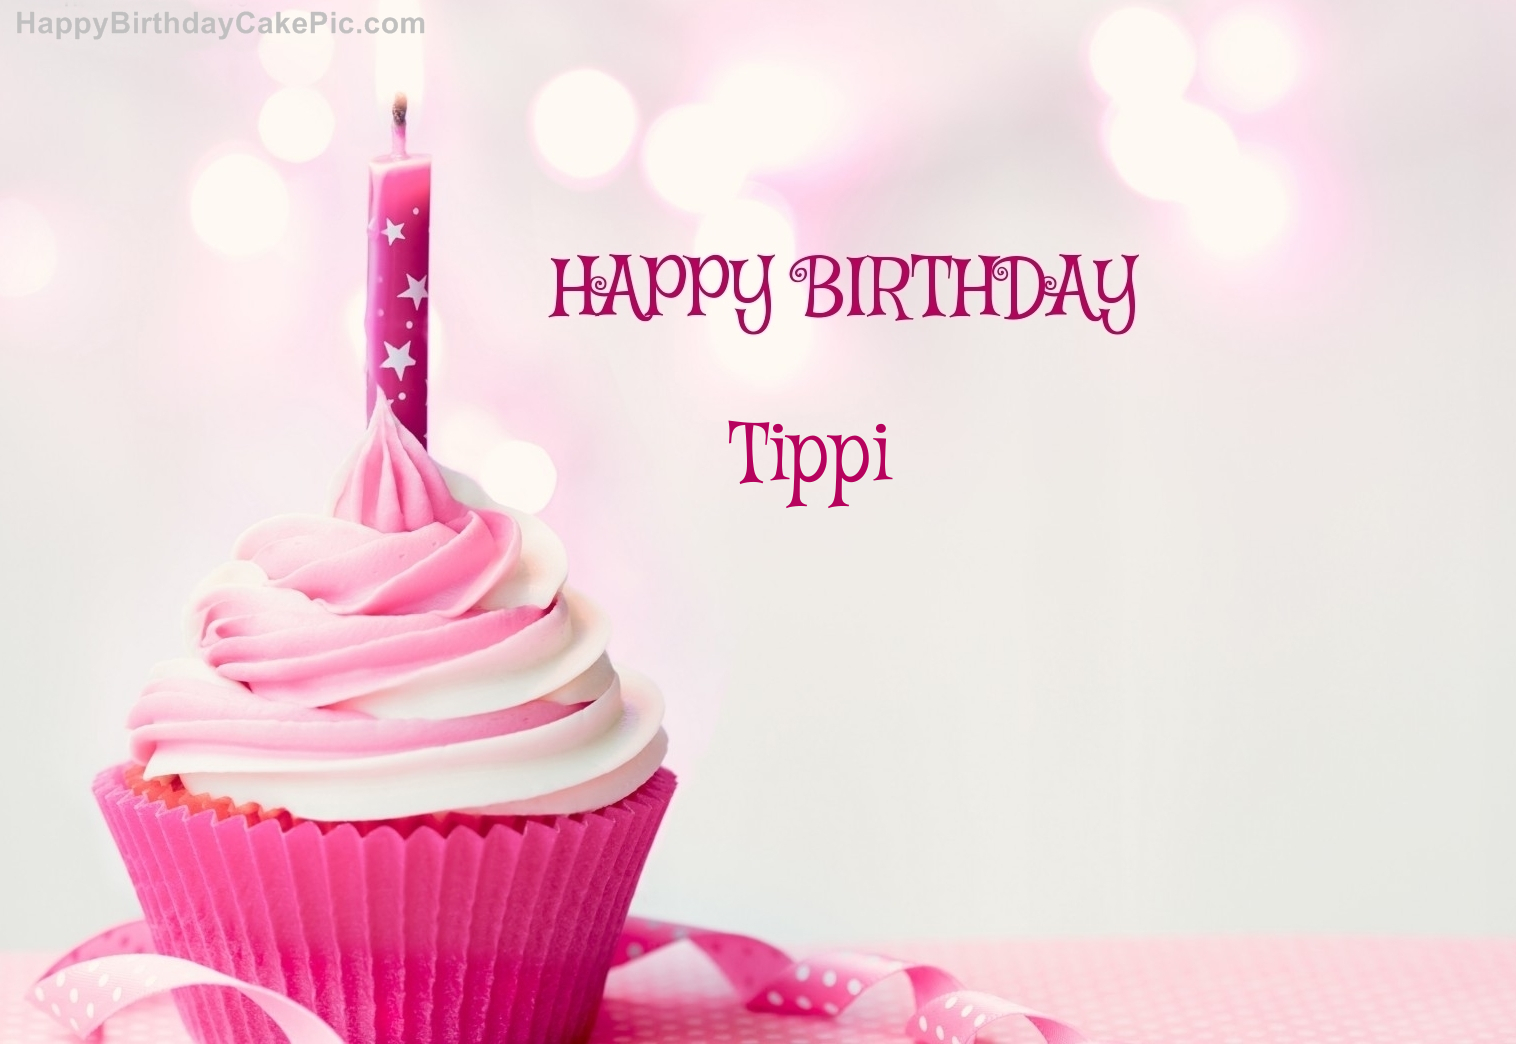 ️ Happy Birthday Cupcake Candle Pink Cake For Tippi